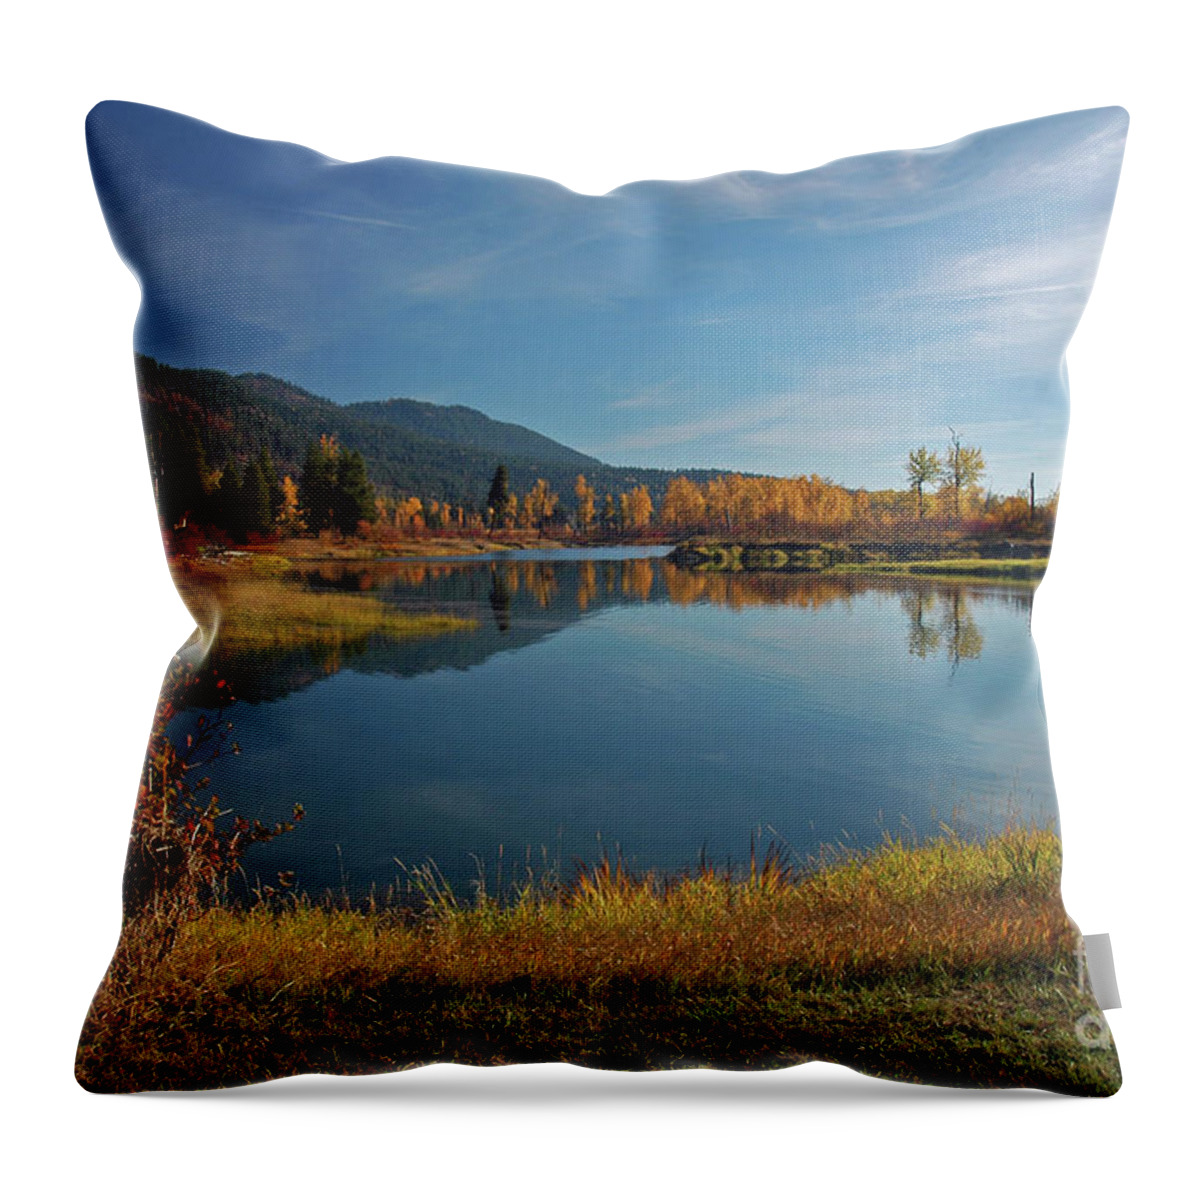 River Throw Pillow featuring the photograph Pend Oreille River by Cindy Murphy - NightVisions